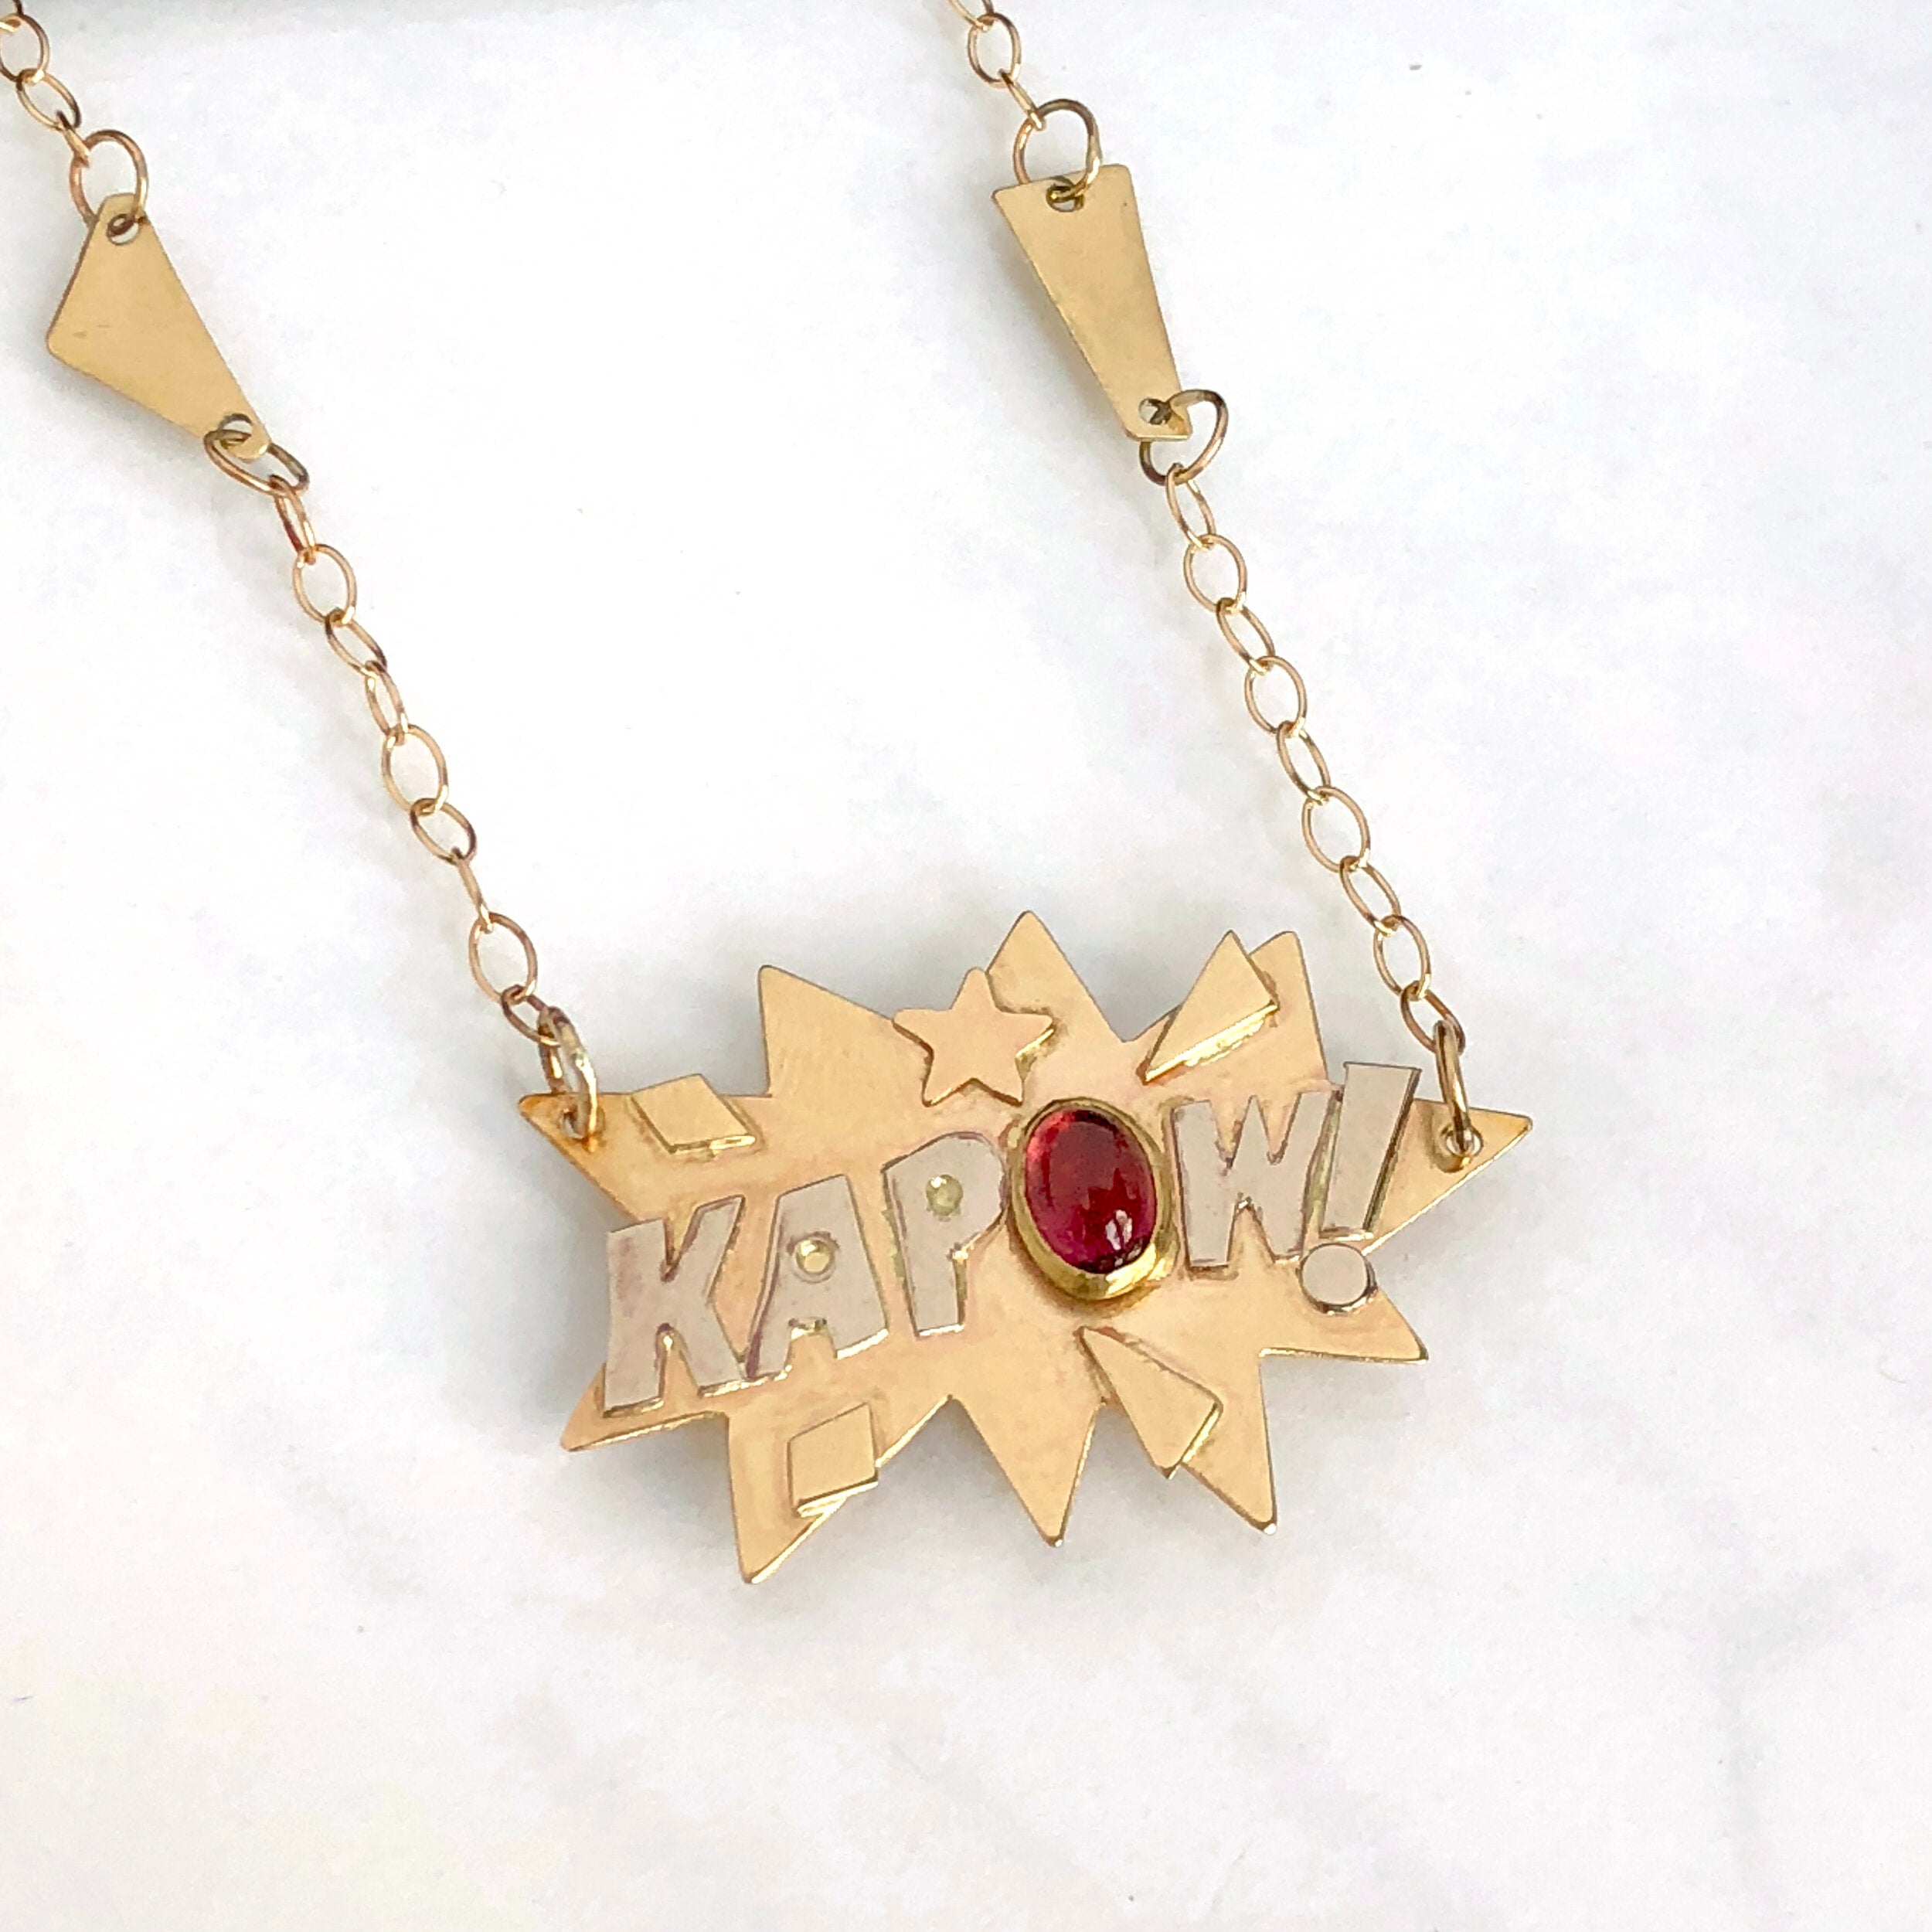 14K KAPOW Comic Necklace Rubellite Tourmaline, SOLID Gold, One of a Kind